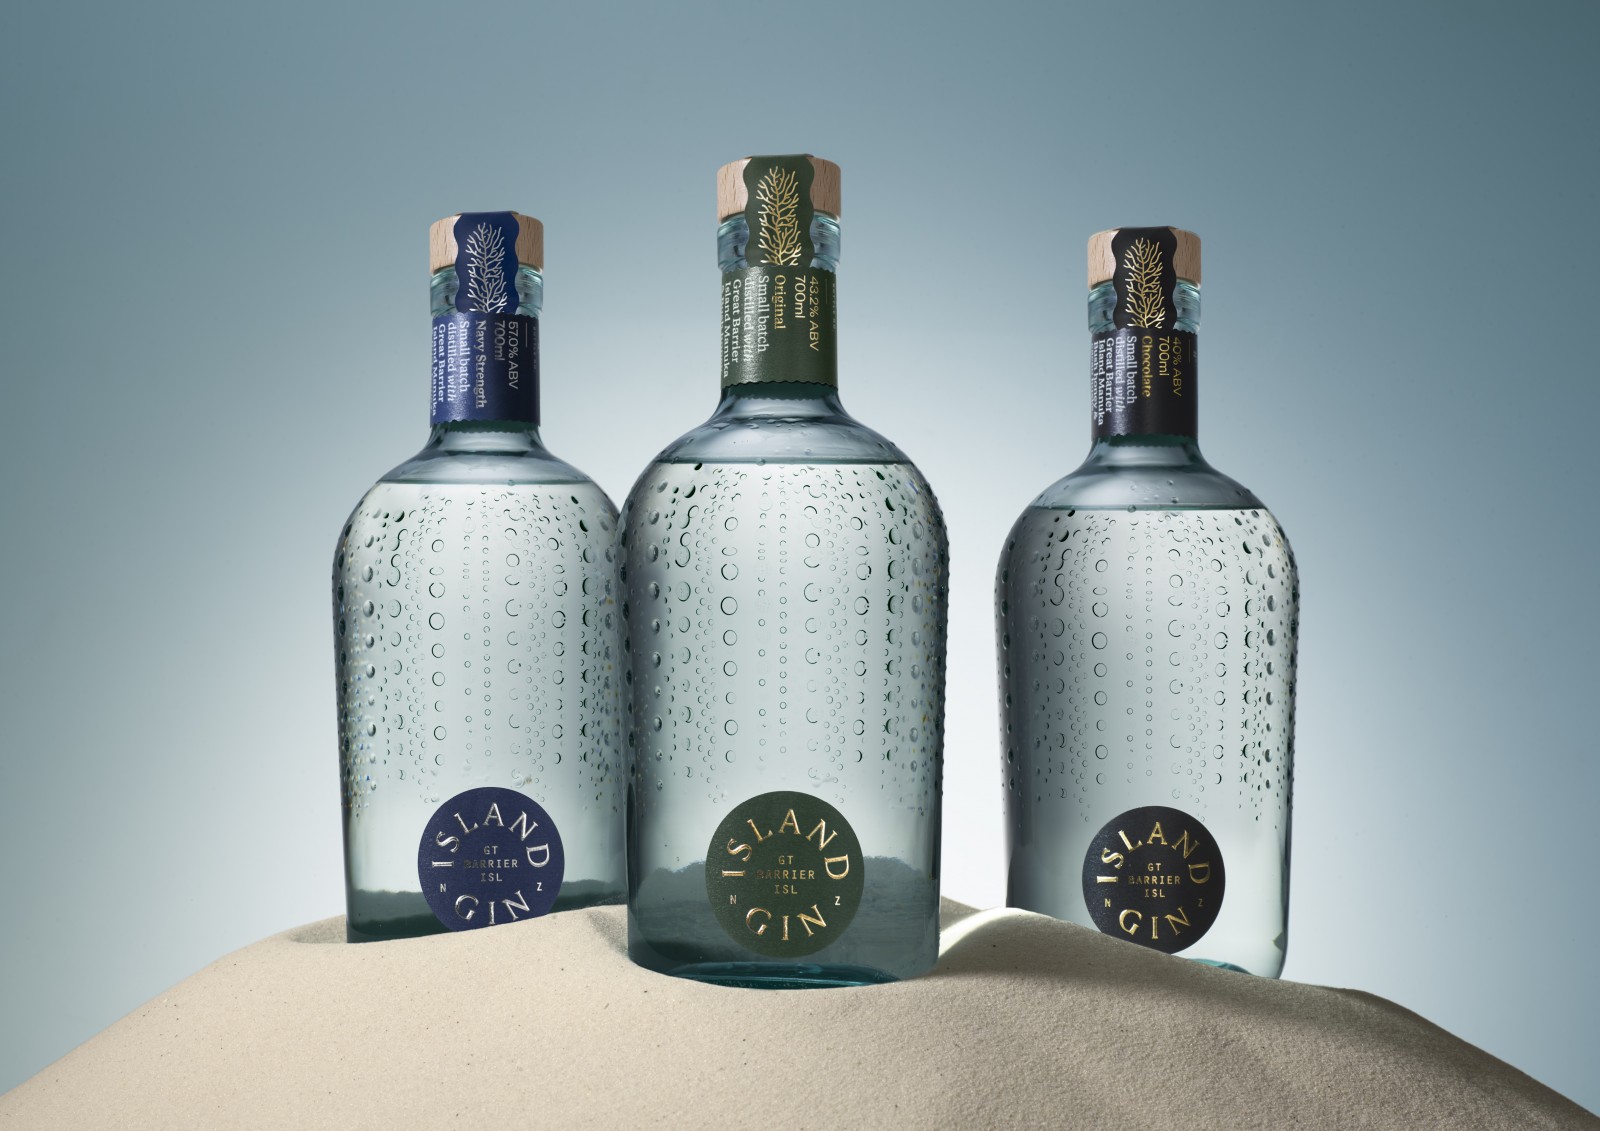 One Design Creates Packaging Design for Island Gin